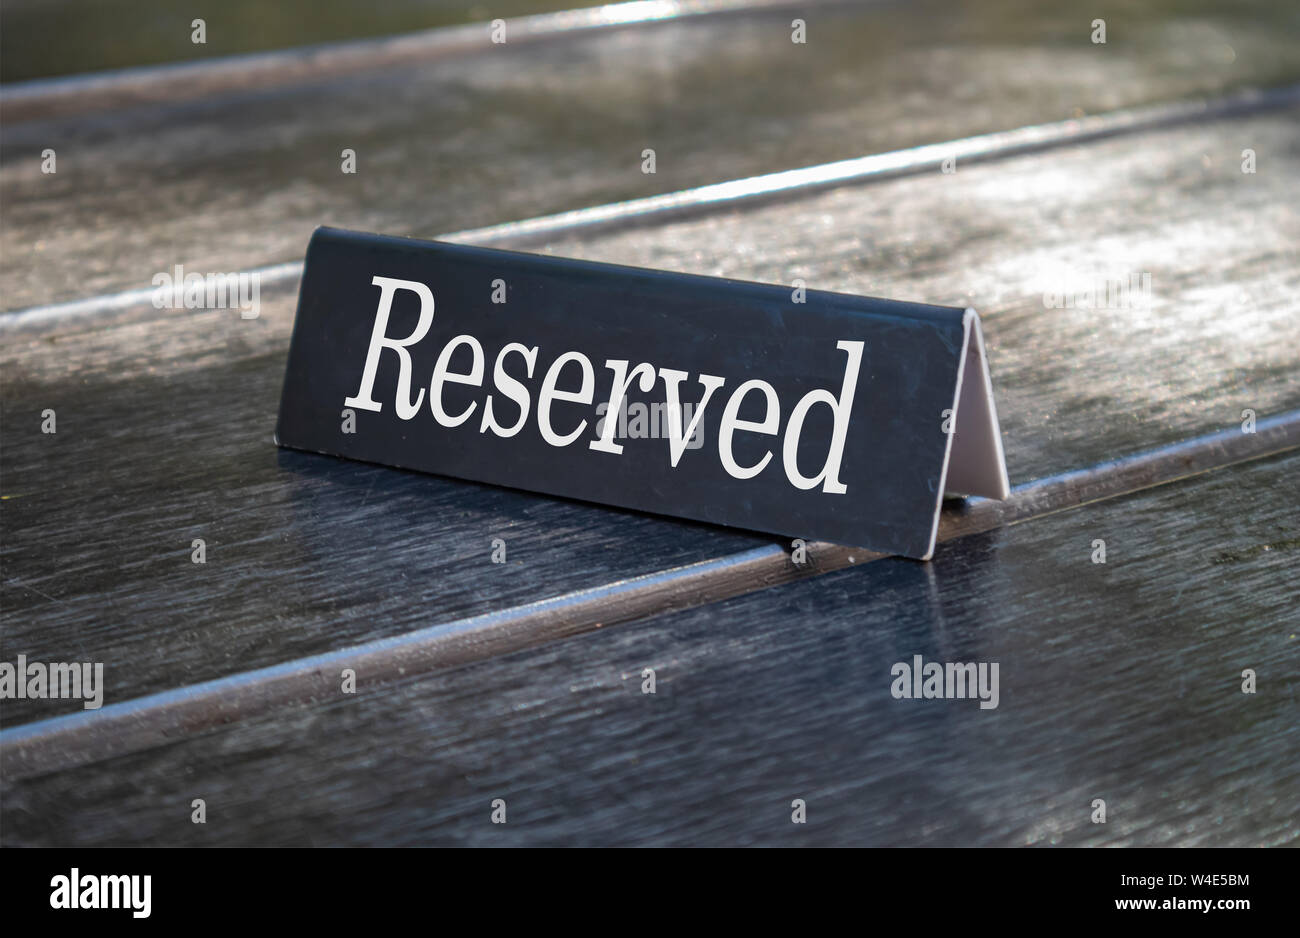 Reserved sign, reservation concept. Text reserved on metal black color plate, white color letters, on wooden table. Close up view with details Stock Photo